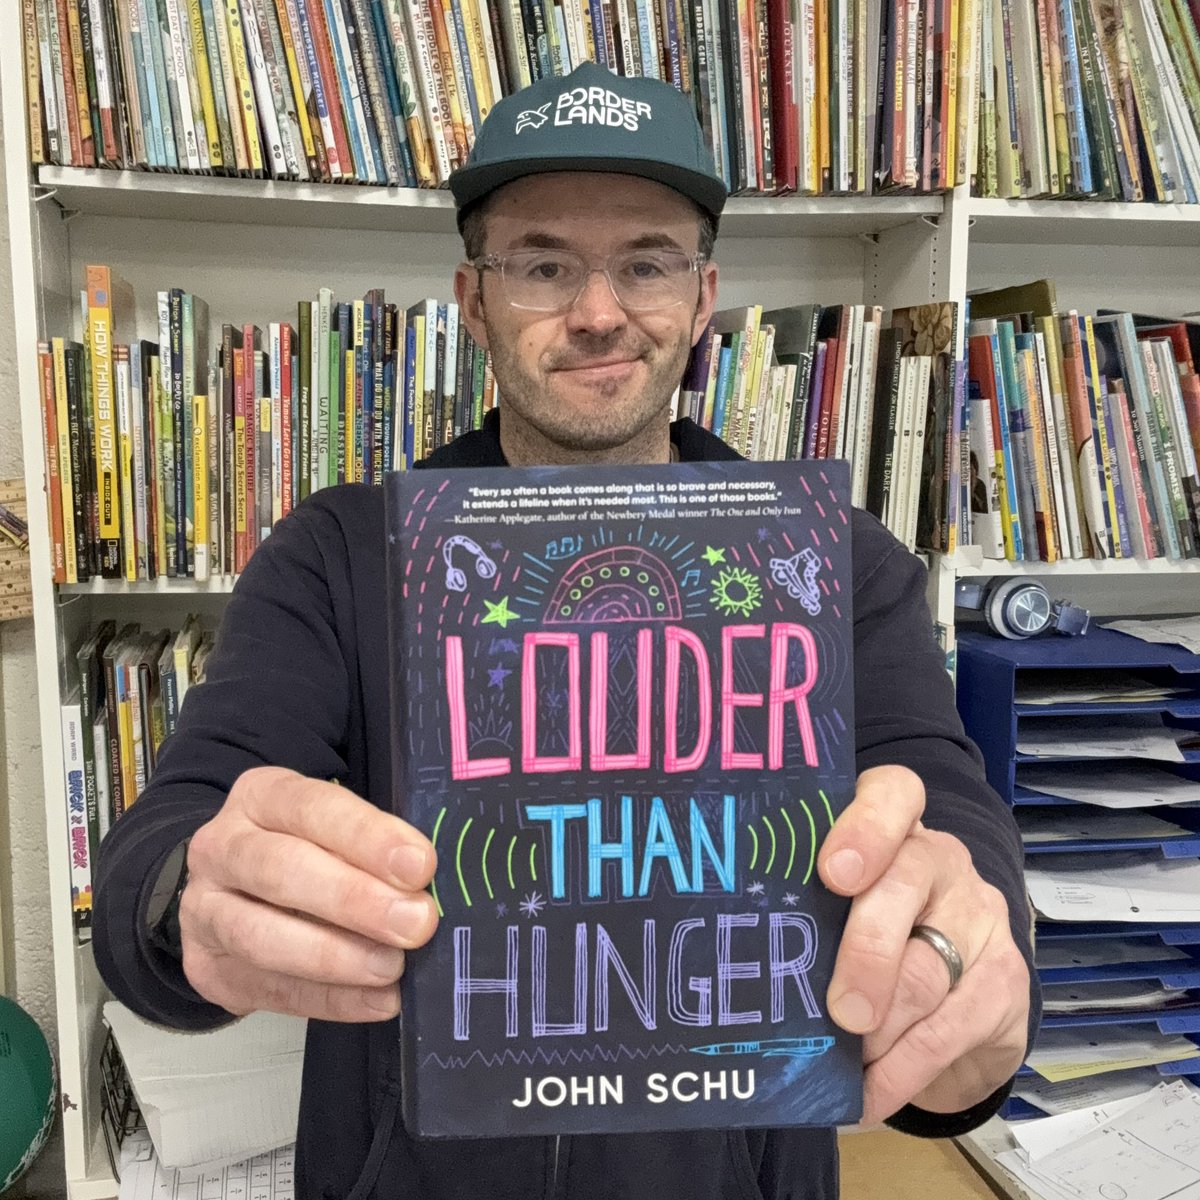 This is me holding my friend John Schu’s beautiful brand new book. You should buy this book because it is brilliant and important. I’d love to see this book on next week’s best seller lists. Schu has helped so many books find so many readers. I hope we will help get his